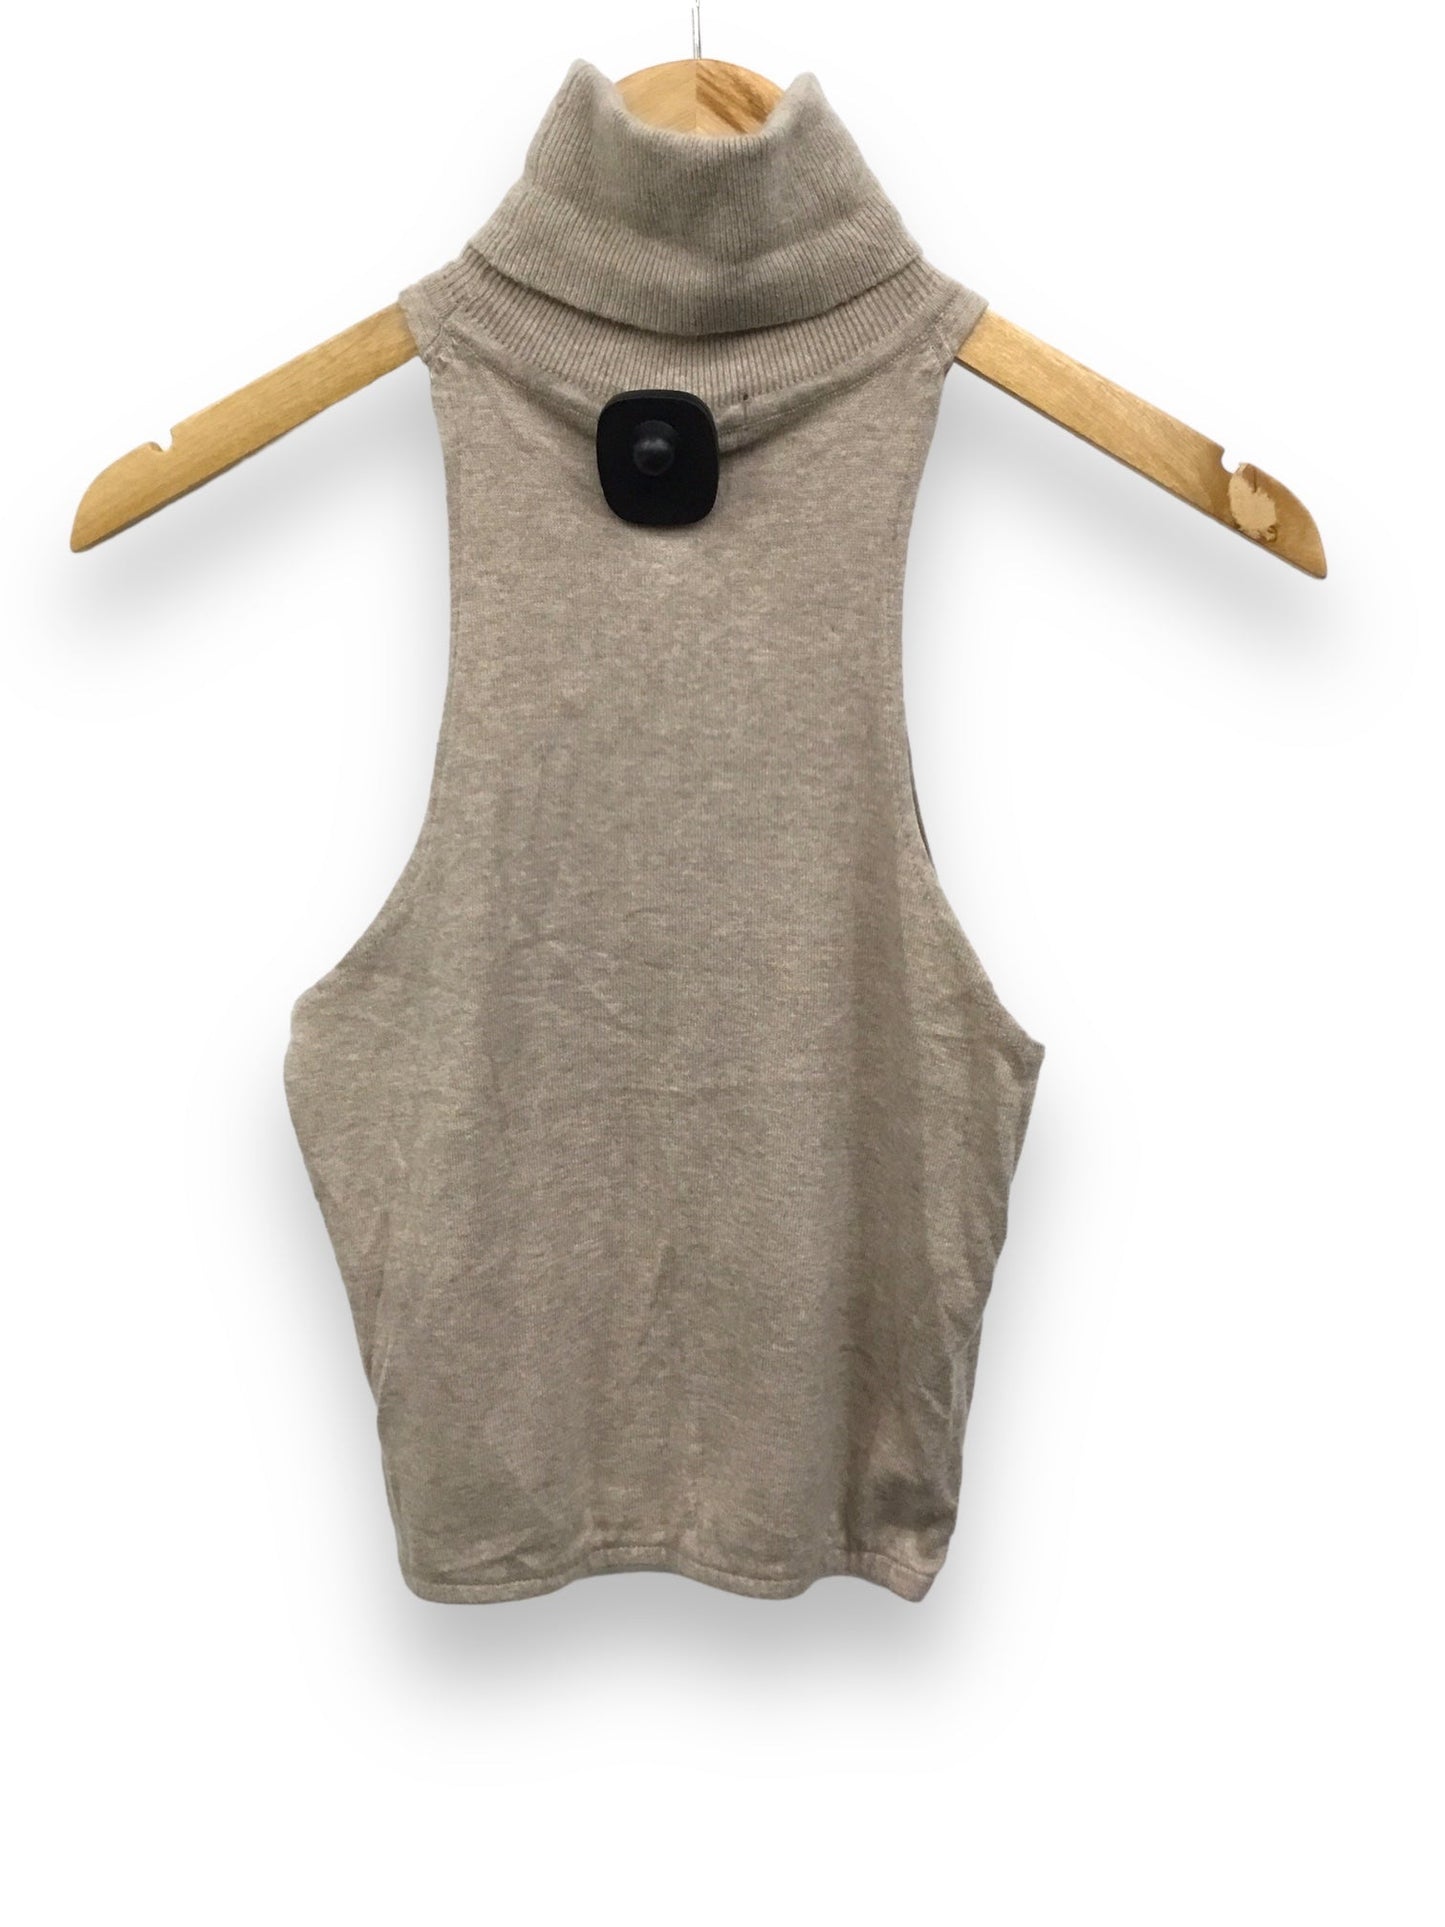 Top Sleeveless By Gap  Size: Xs